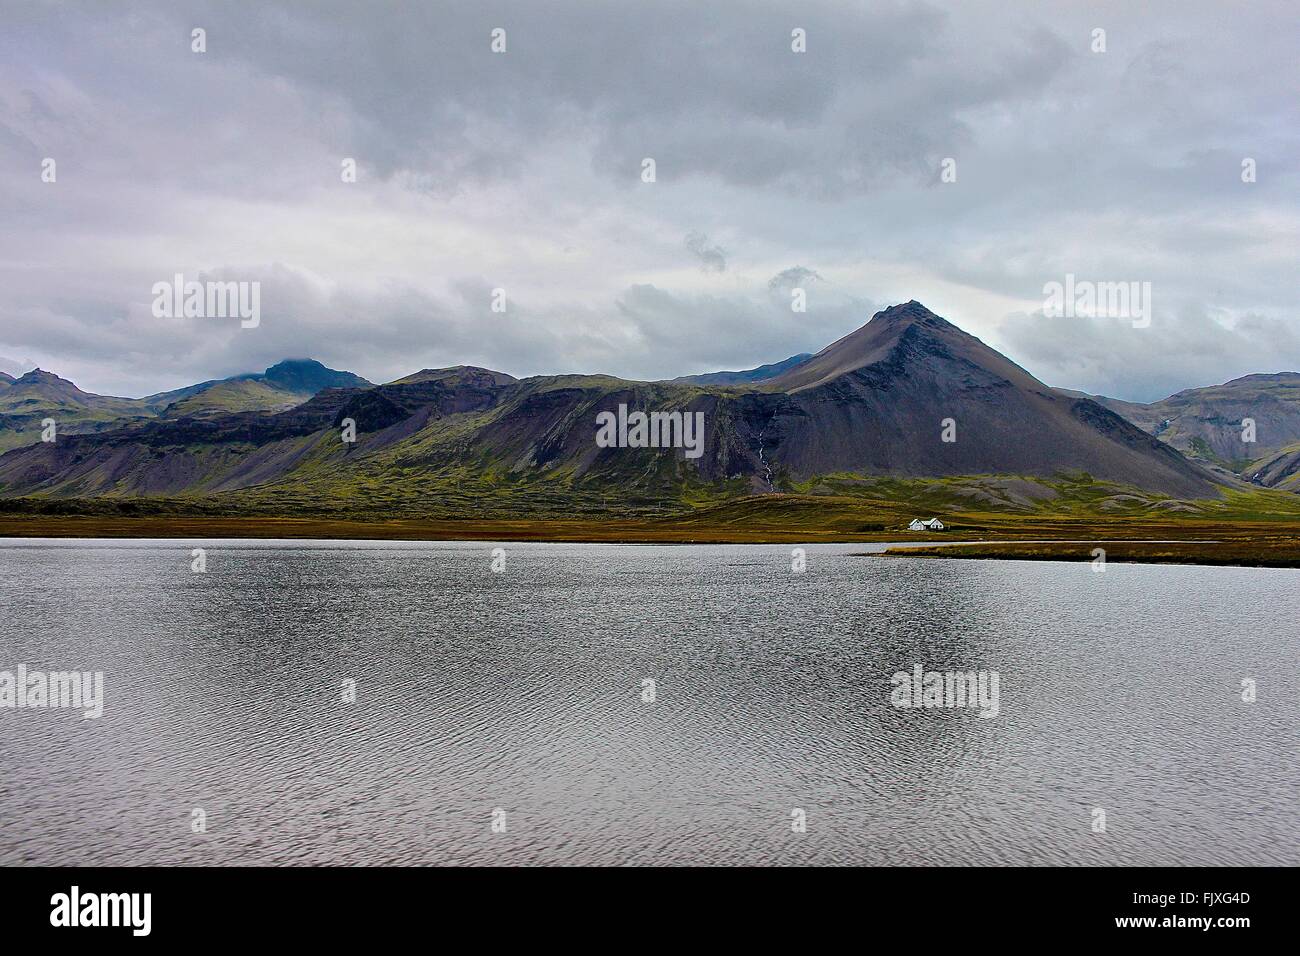 Scenic View Of Calm Lake By Mountains Against Cloudy Sky Stock Photo